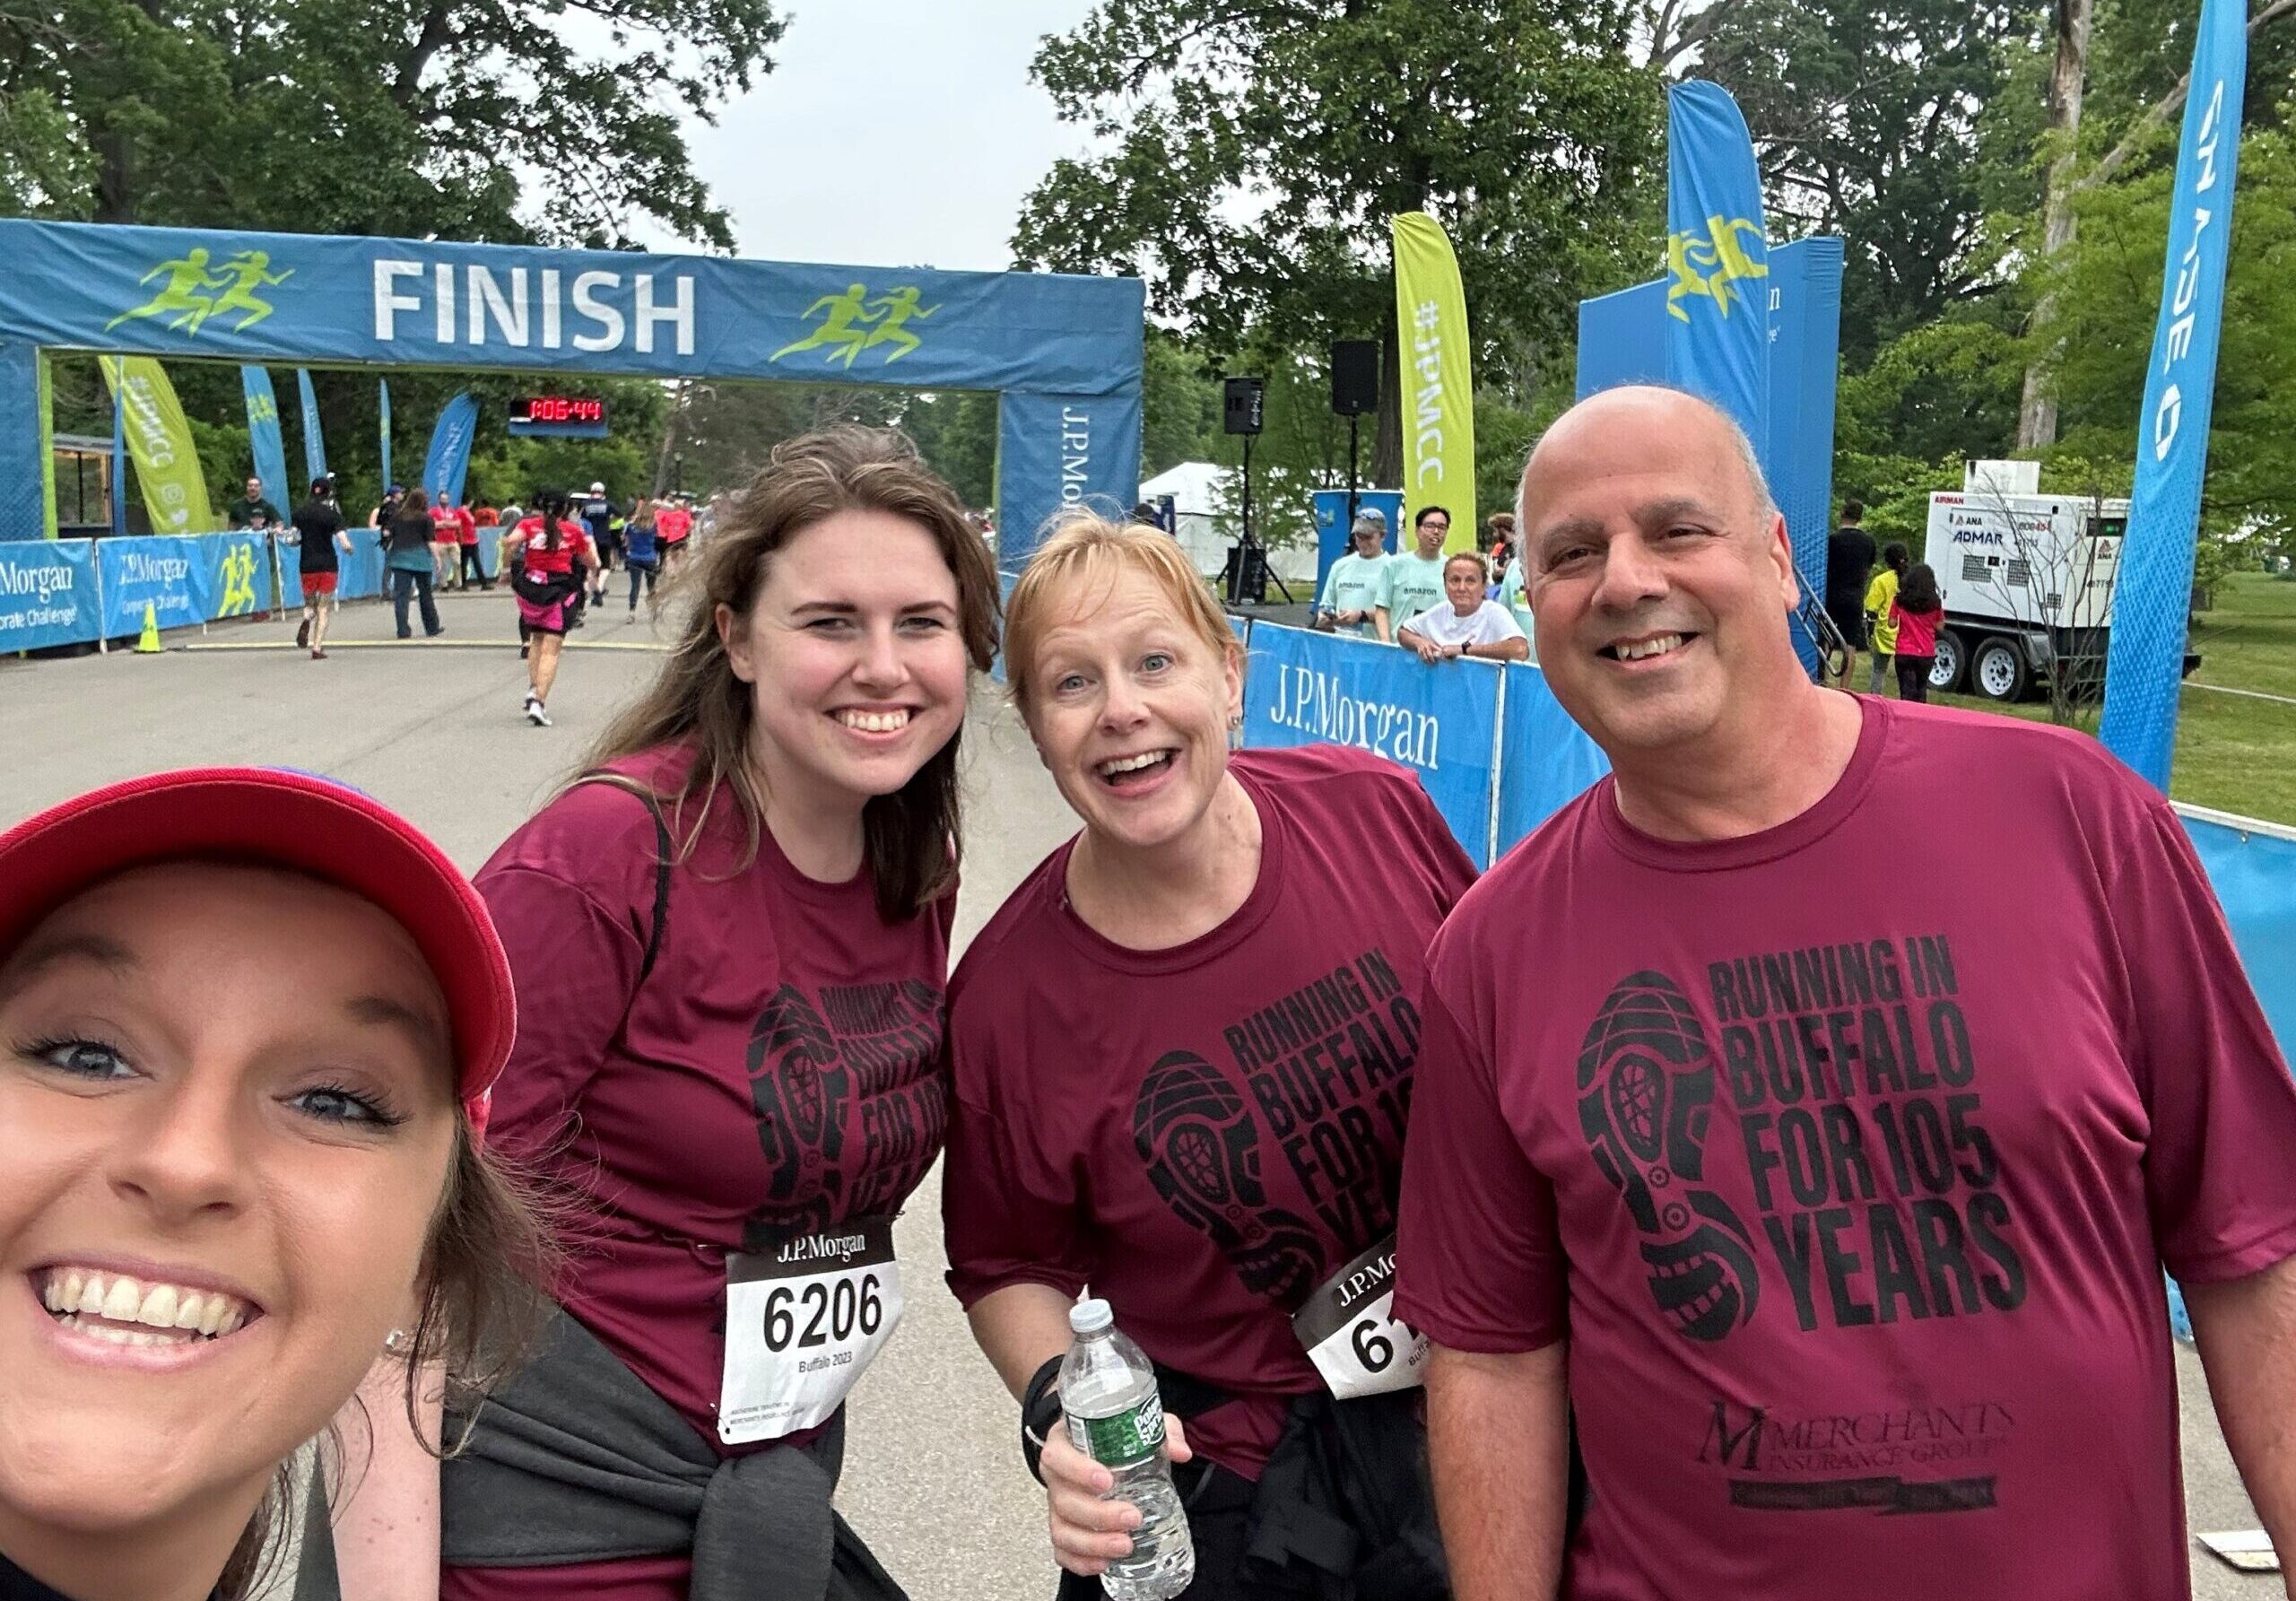 Erica Dalton, Katherine Trautwein, Laurie Maniccia, and Rob Ader smile at the finish line, completing the Corporate Challenge!